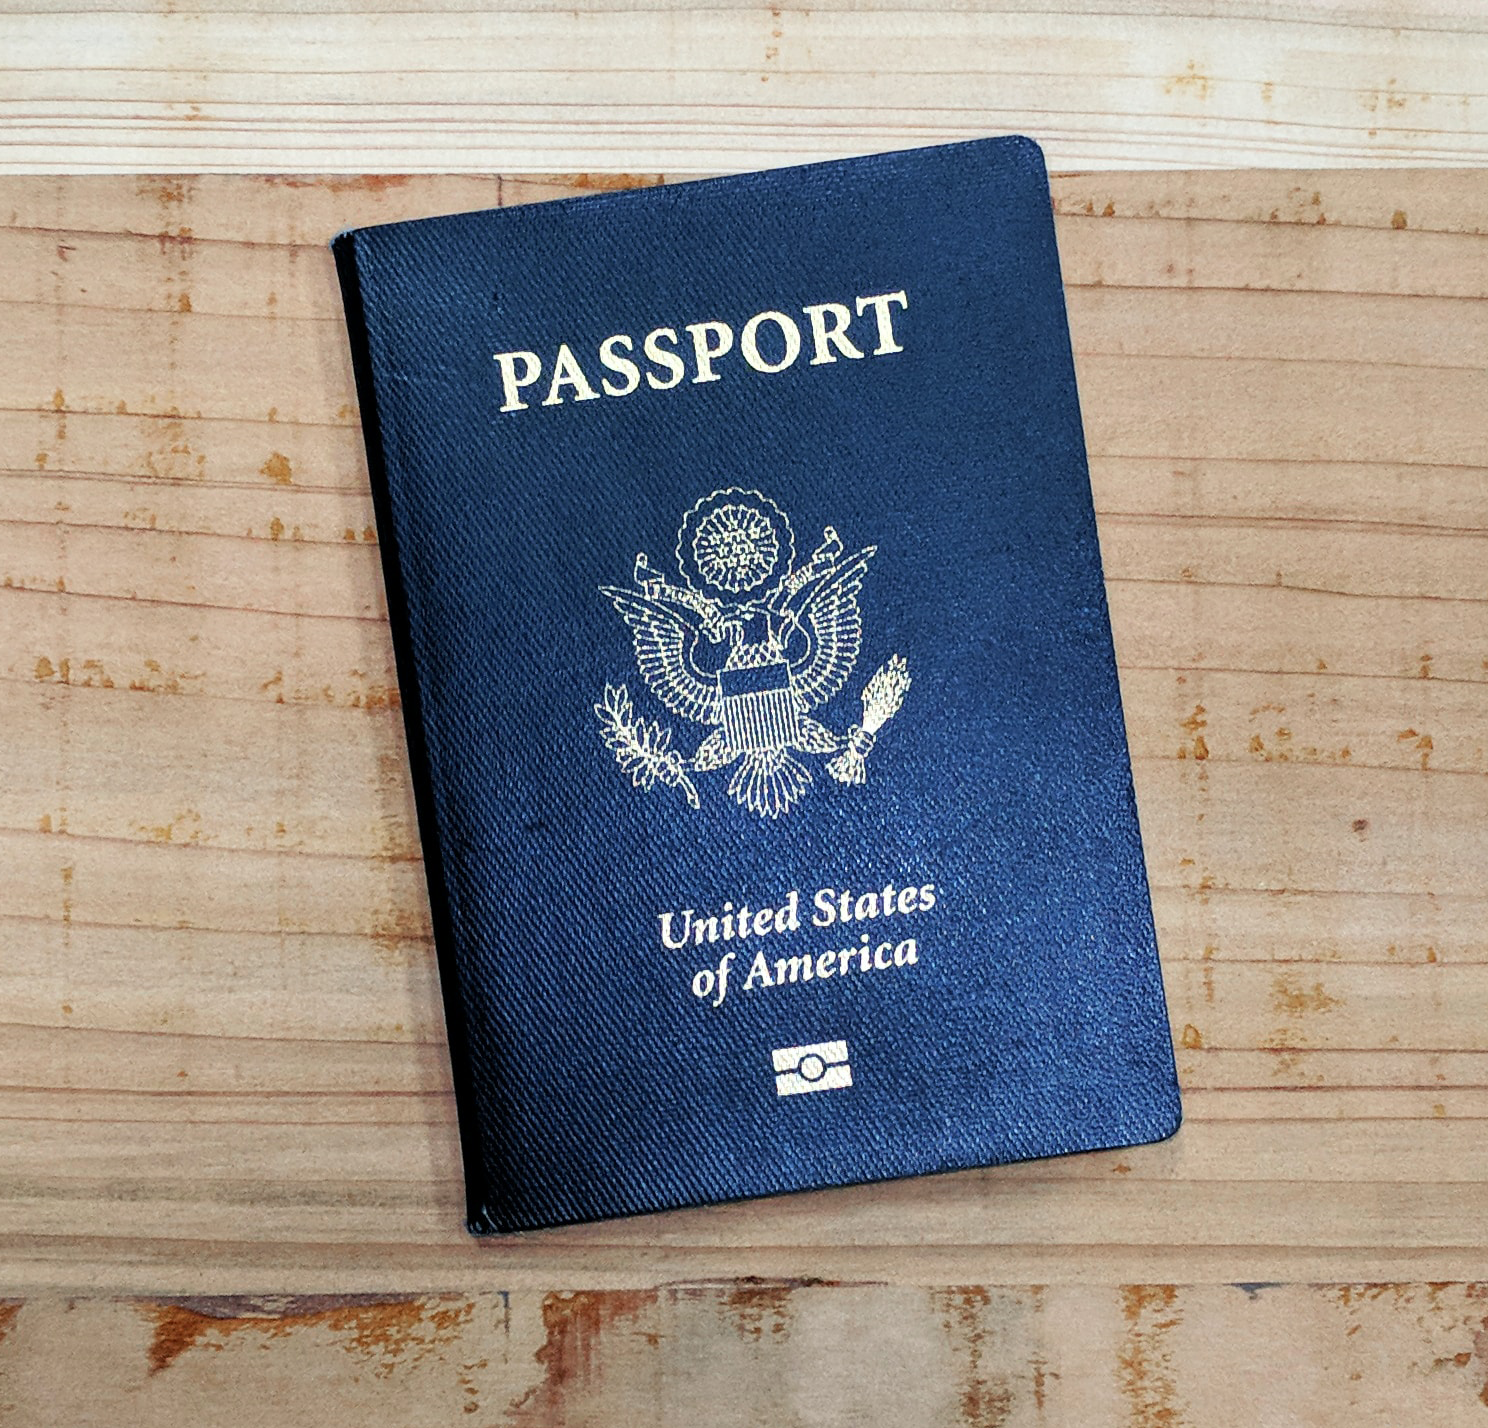 Blue United States Passport booklet on wooden table top